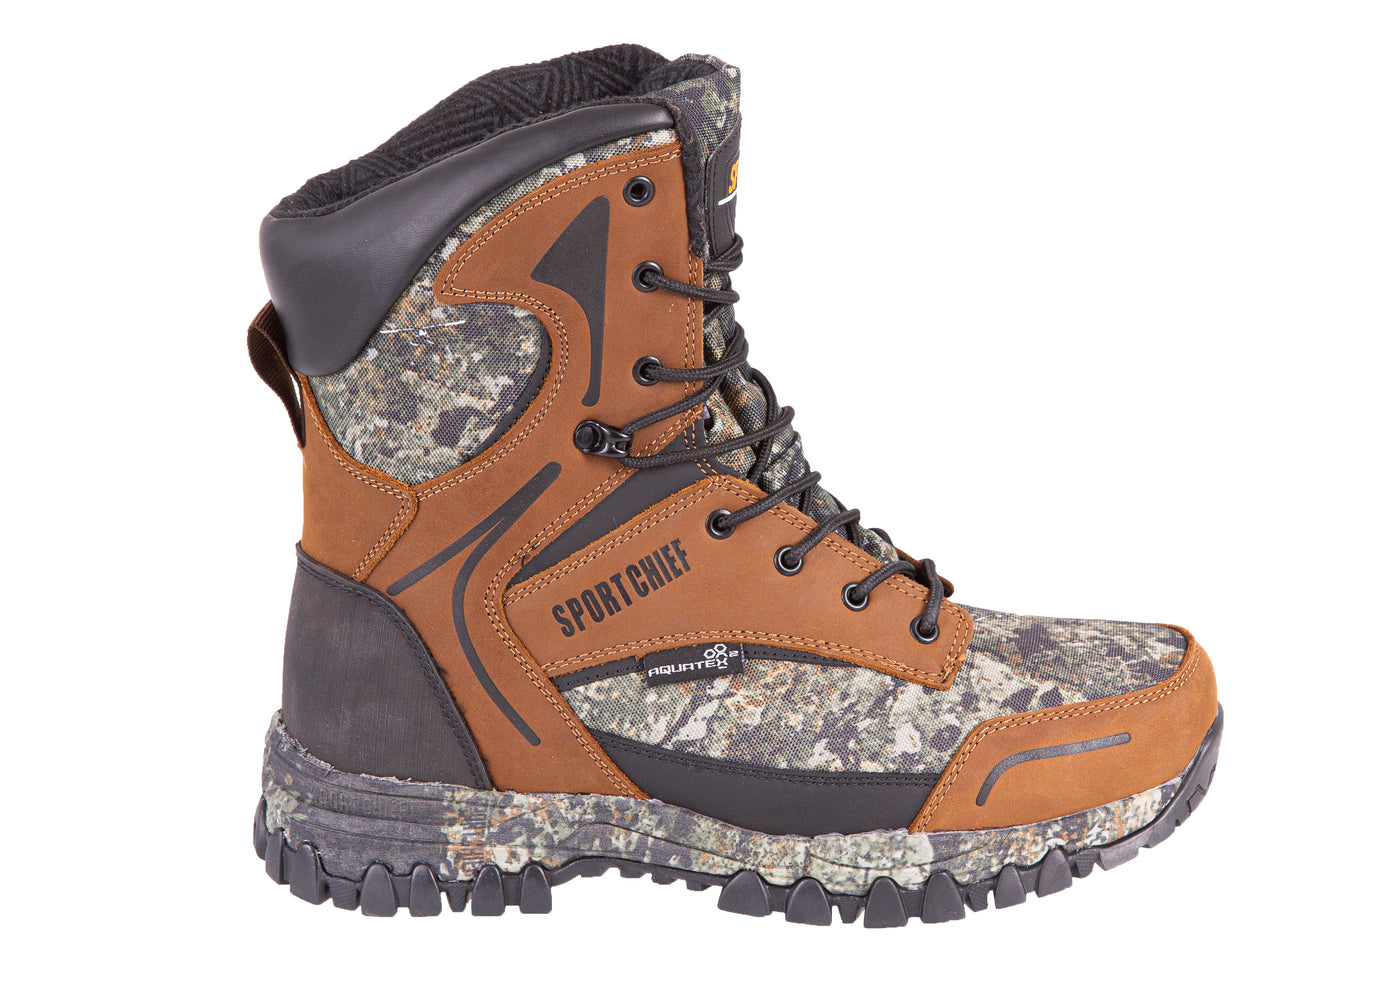 Botte de chasse homme "Panther 3.0" camo The Ripper  - Sportchief